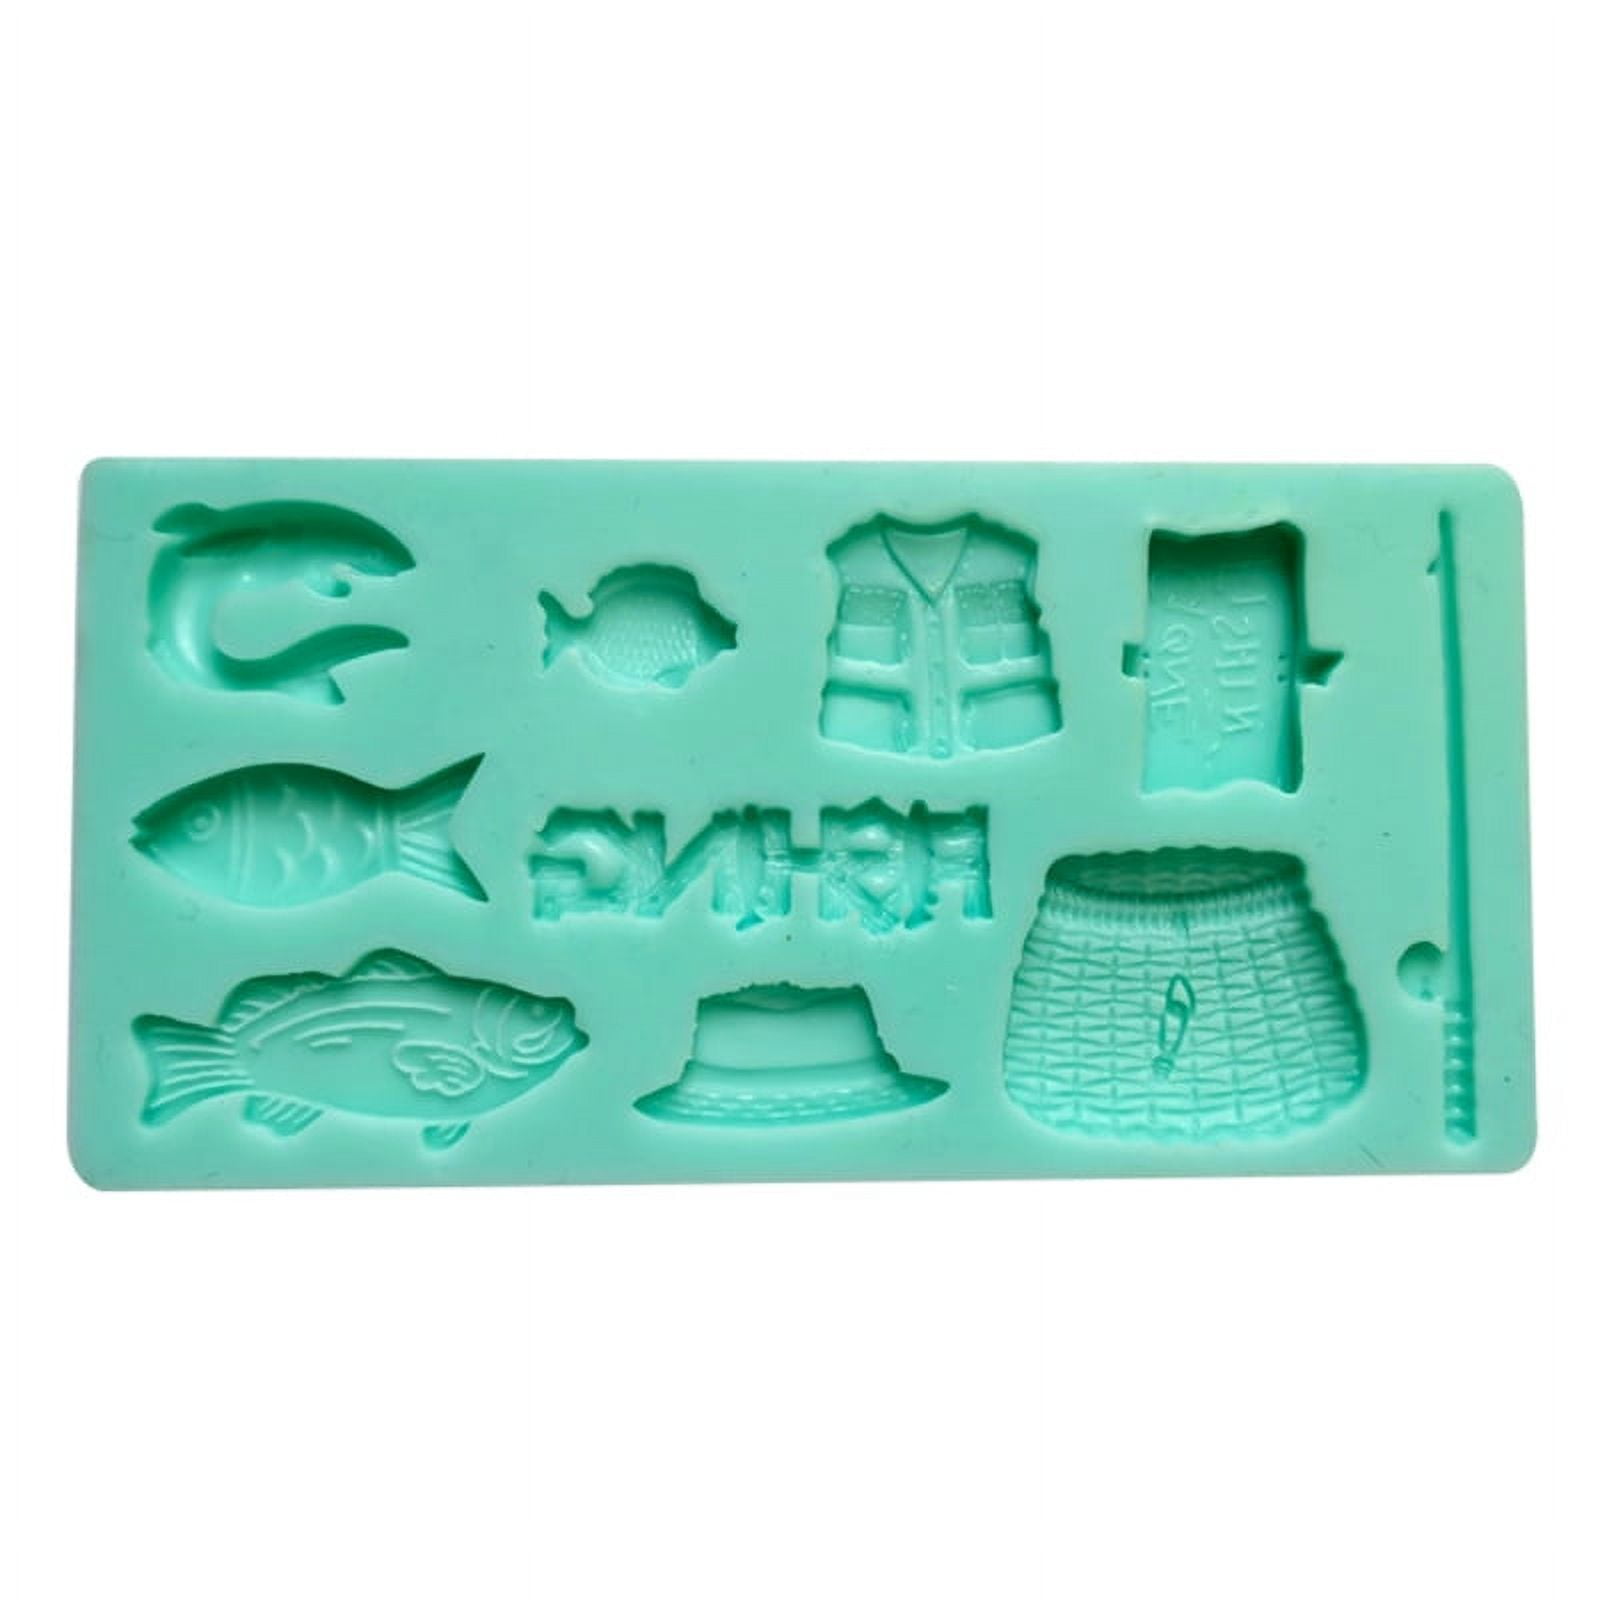 QUMENEY 2 Pack 40-Cavity Square Caramel Candy Silicone Molds